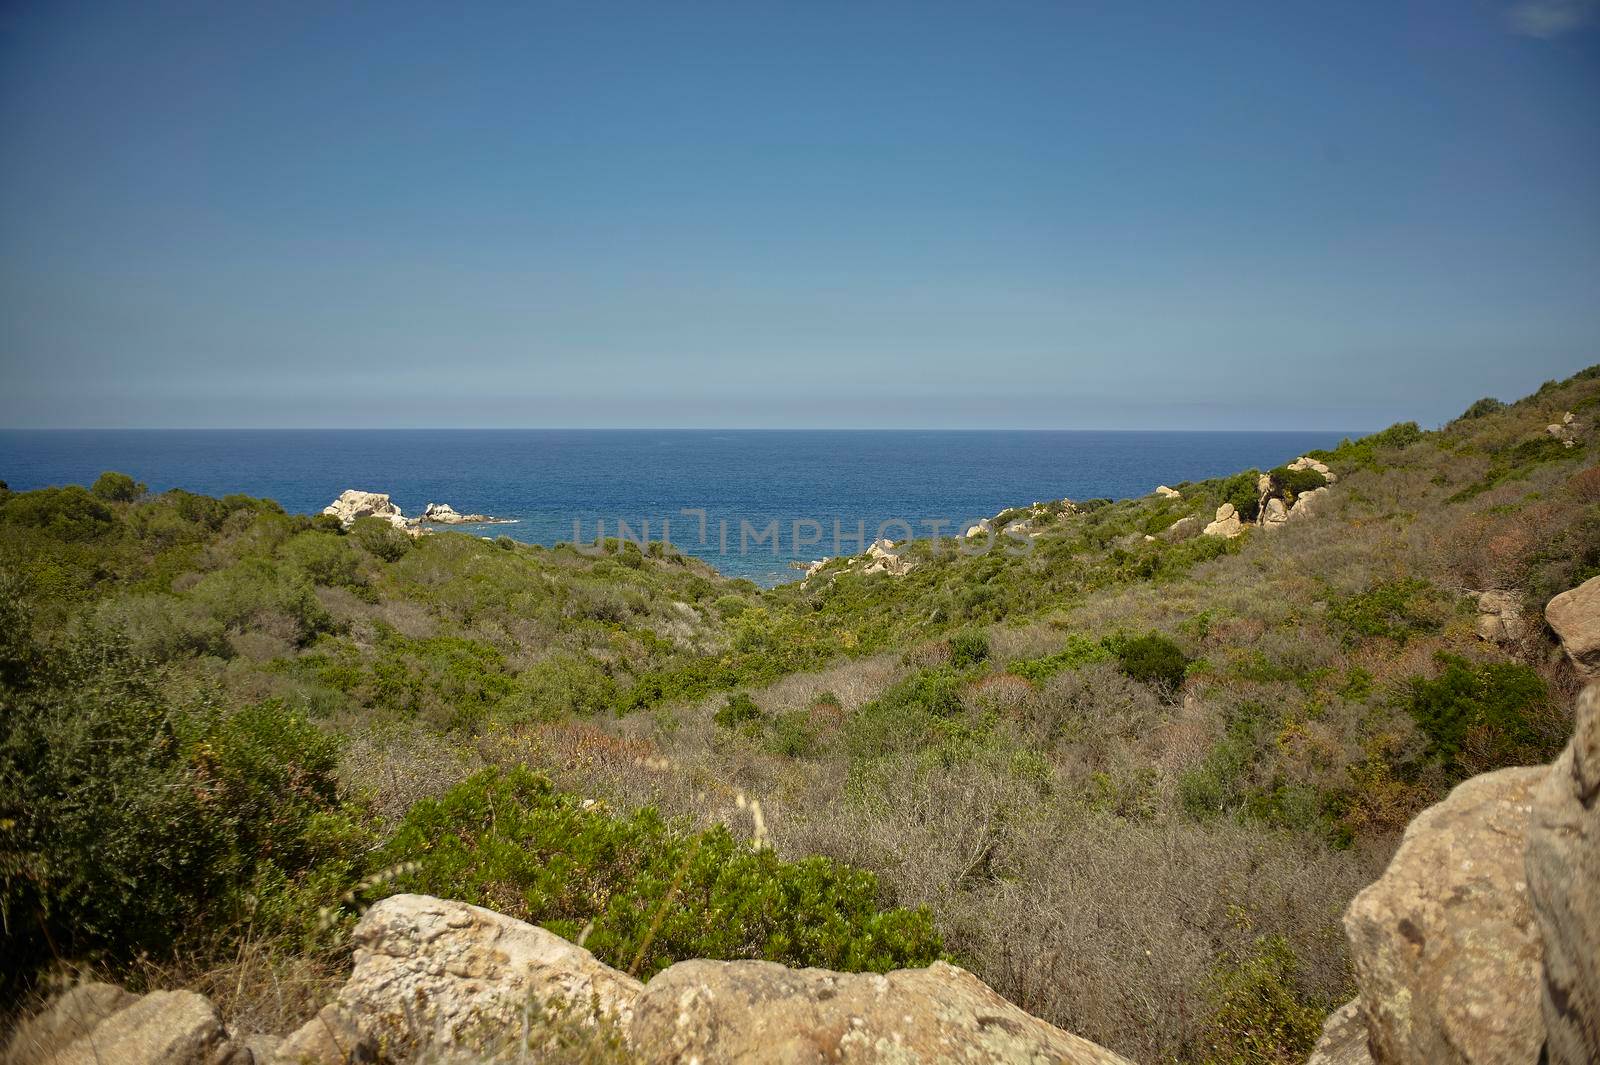 Landscape with rocks, typical Mediterranean vegetation and the background sea to the horizon.